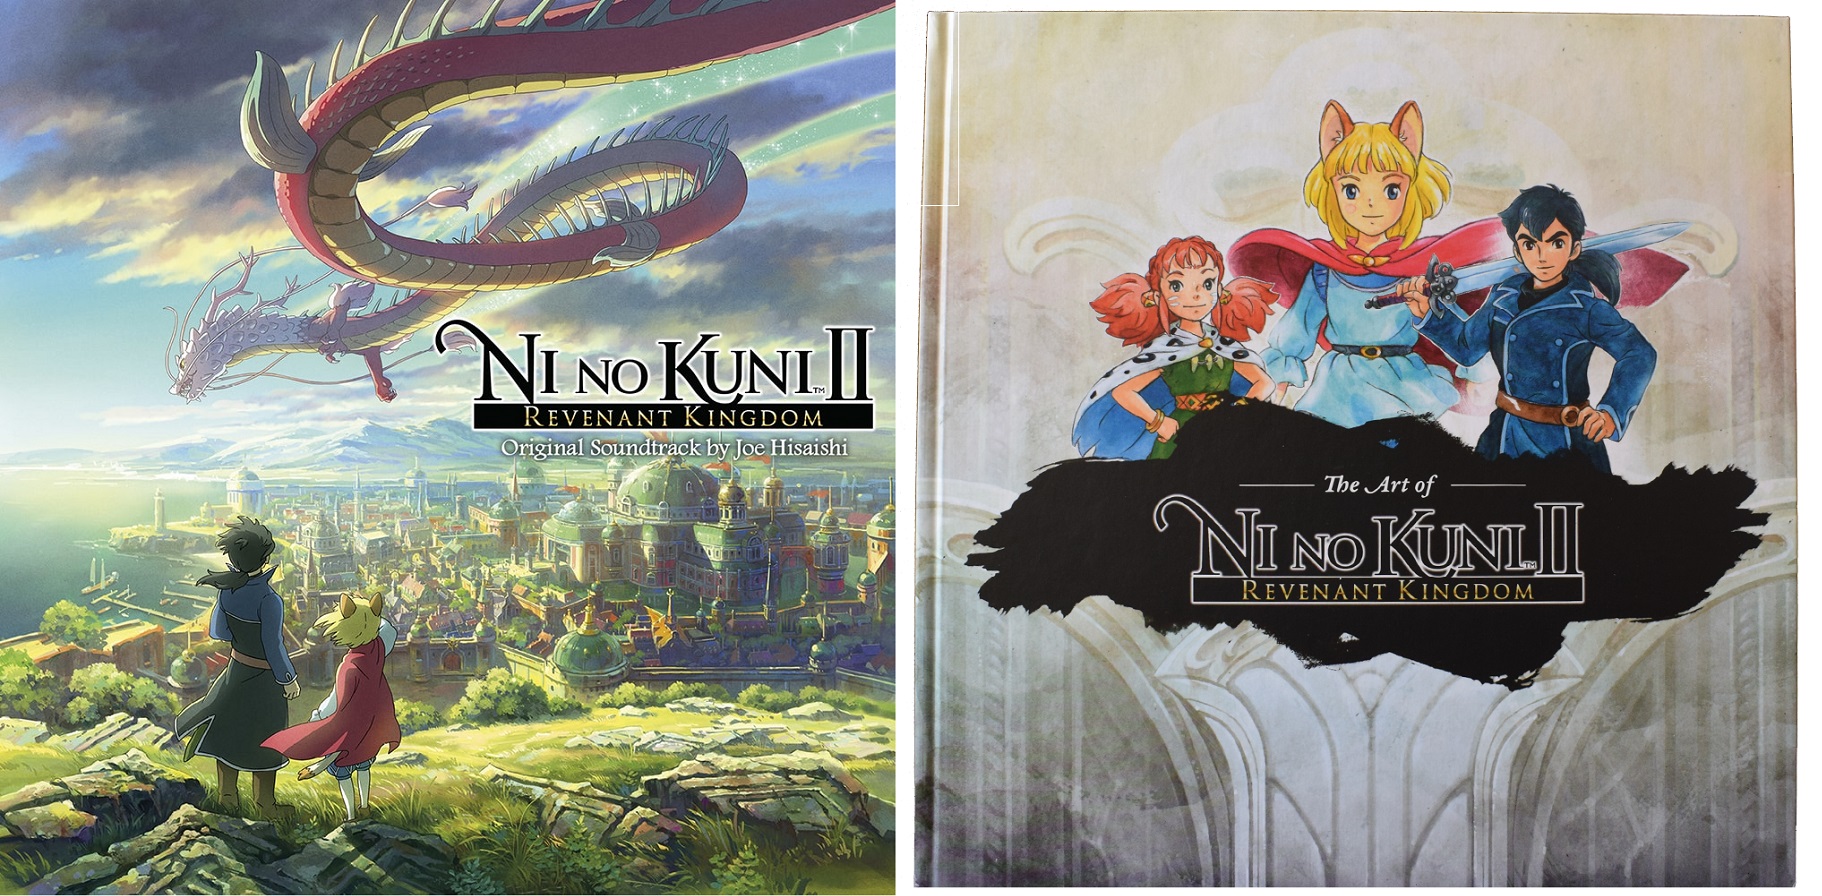 Competition: We have a set of the Ni No Kuni 2 artbook and official